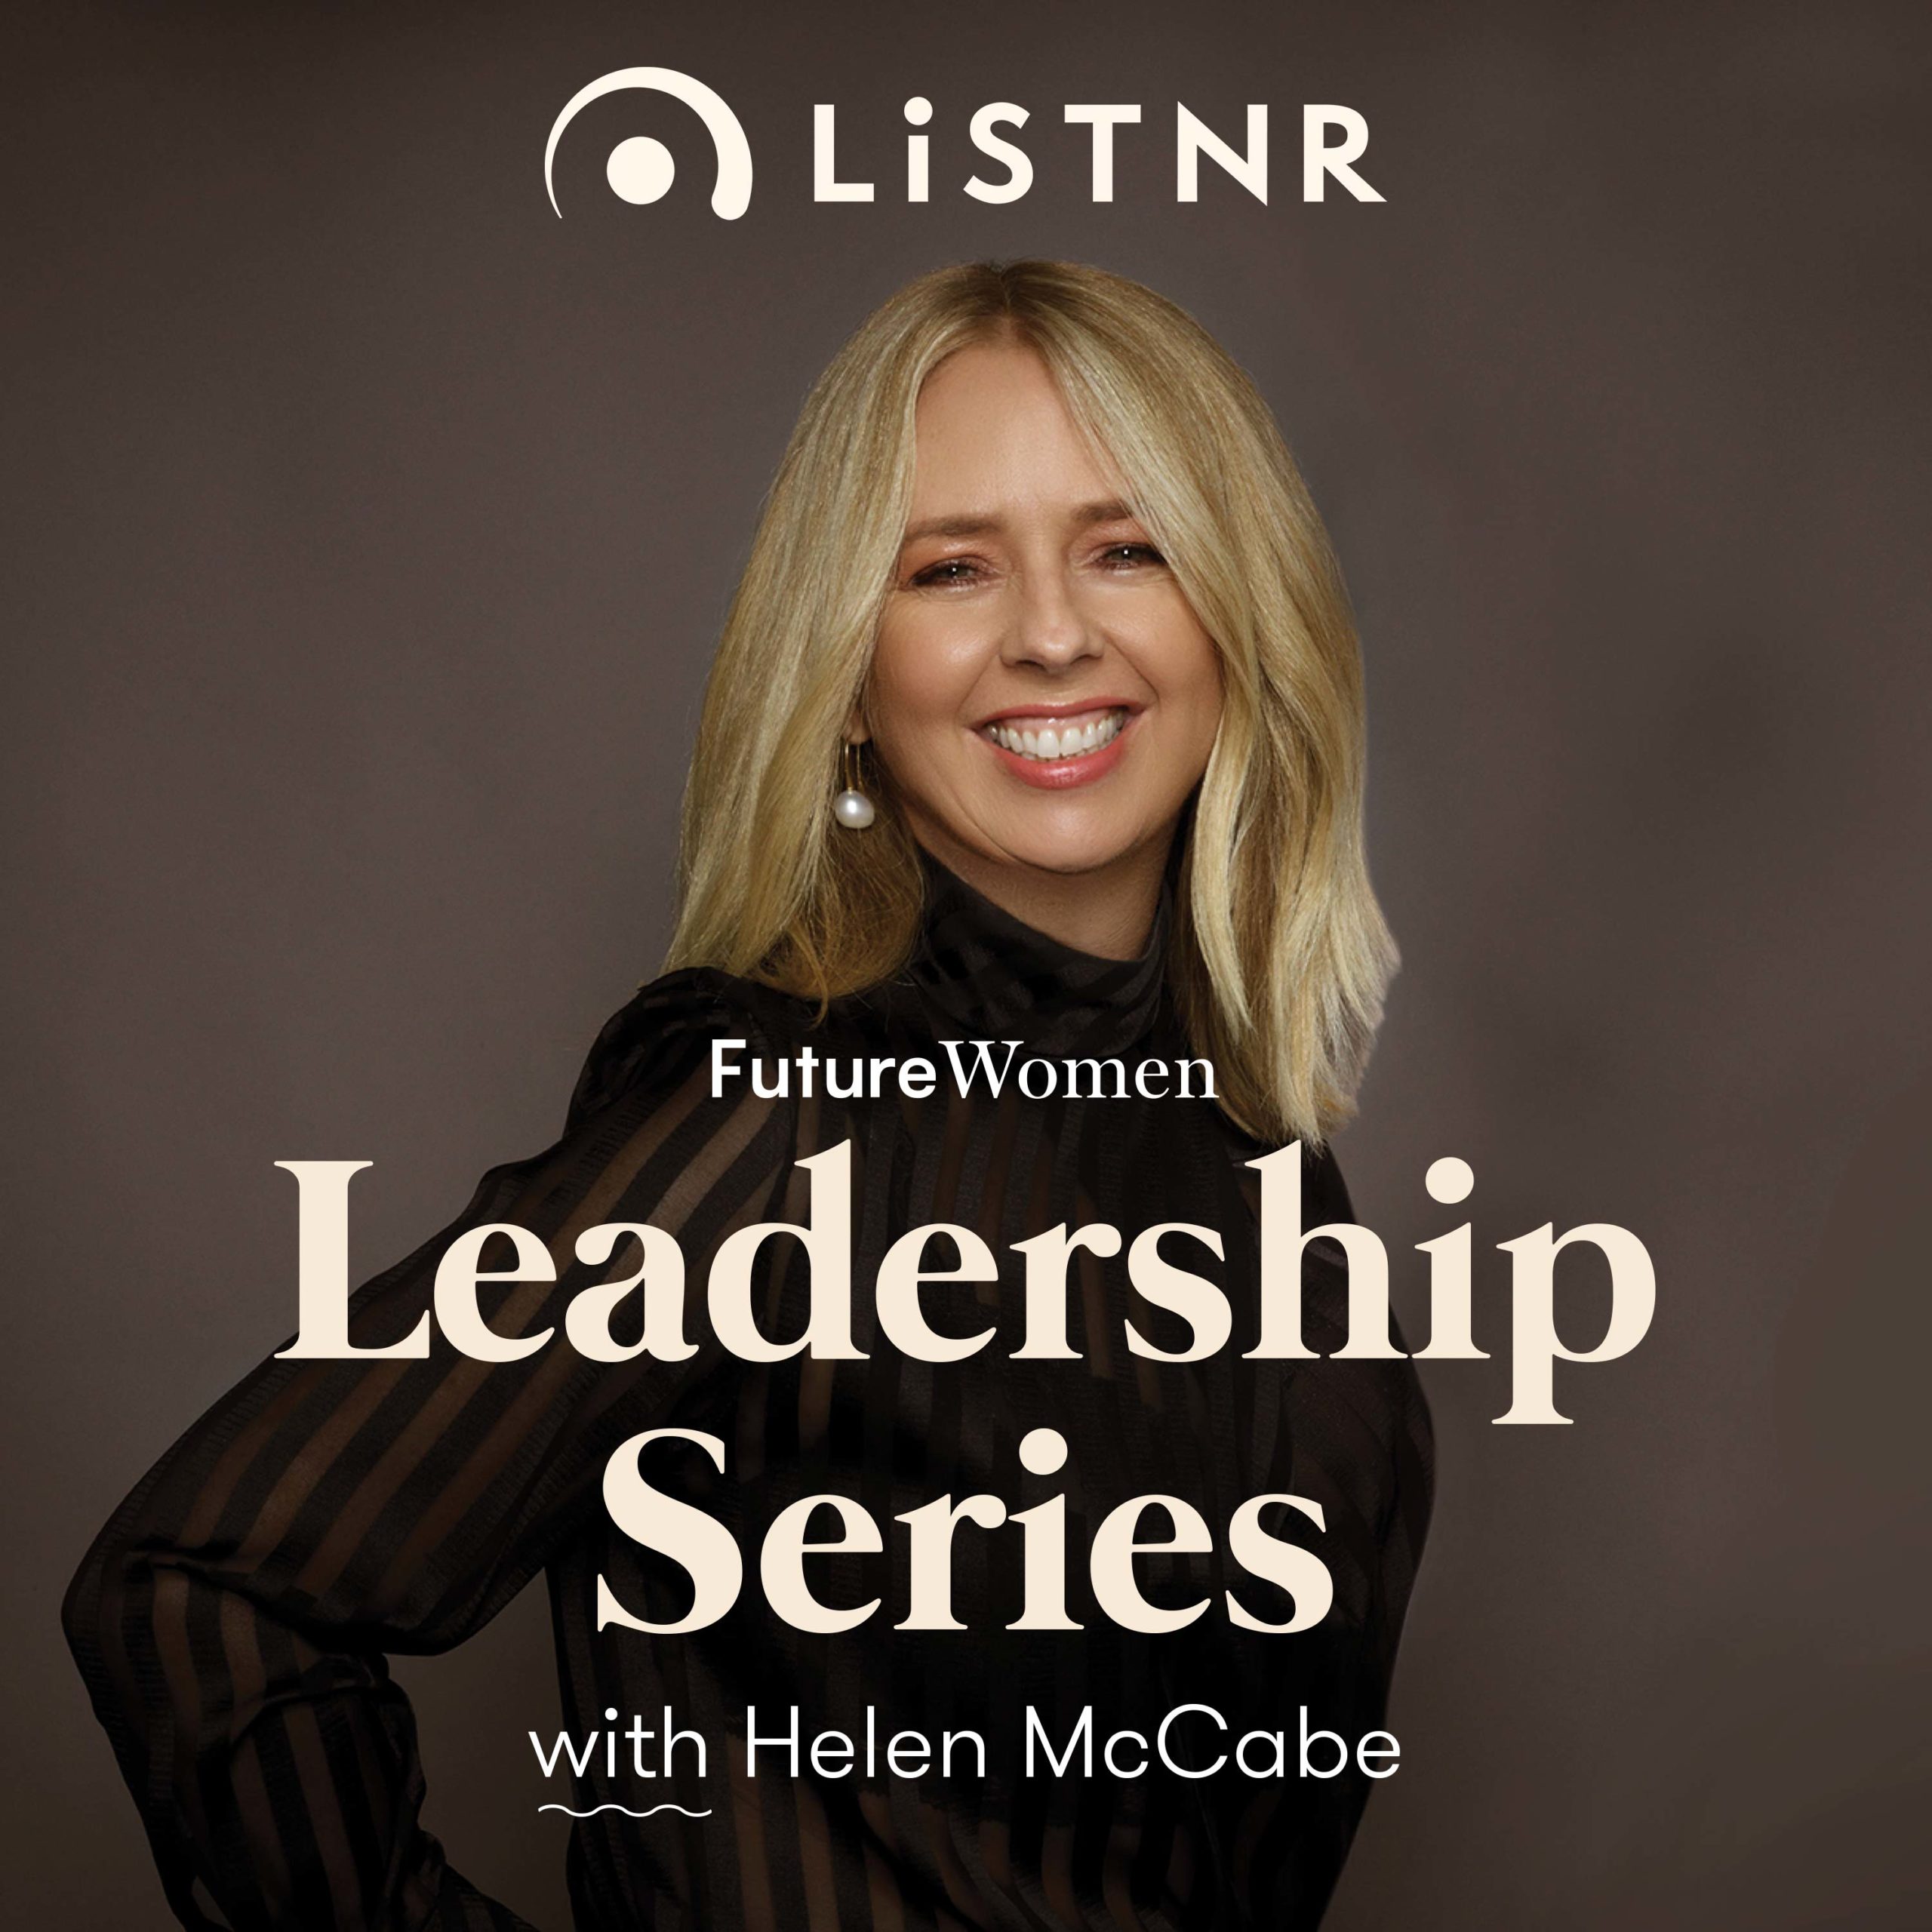 Cover art for the Future Women Leadership Series podcast. Helen McCabe is smiling.